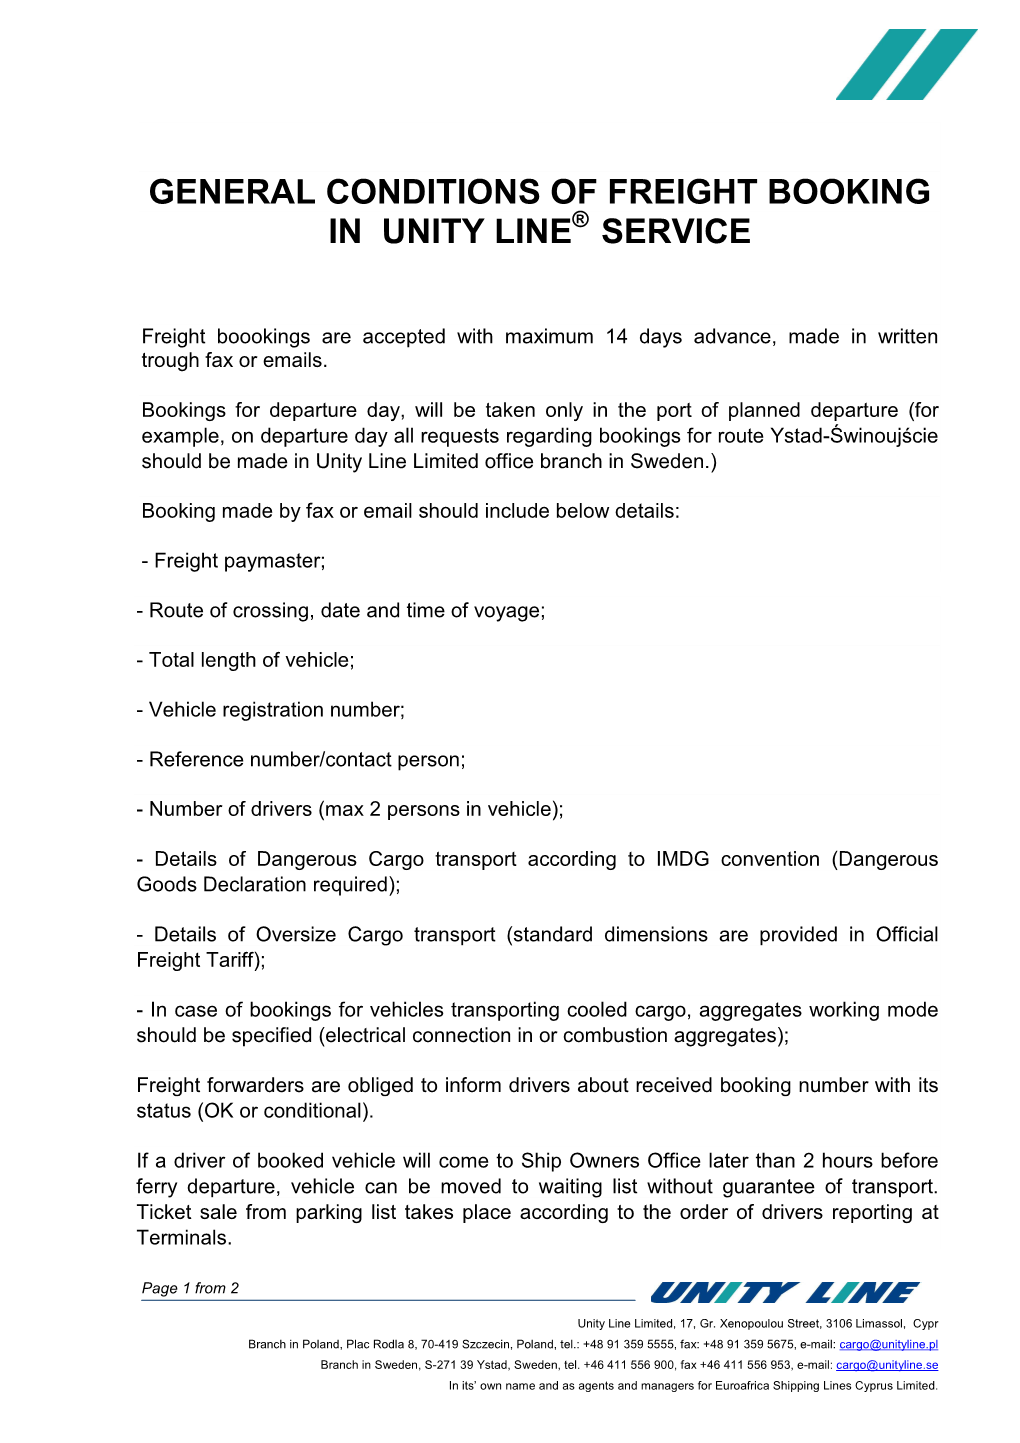 General Conditions of Freight Booking in Unity Line Service